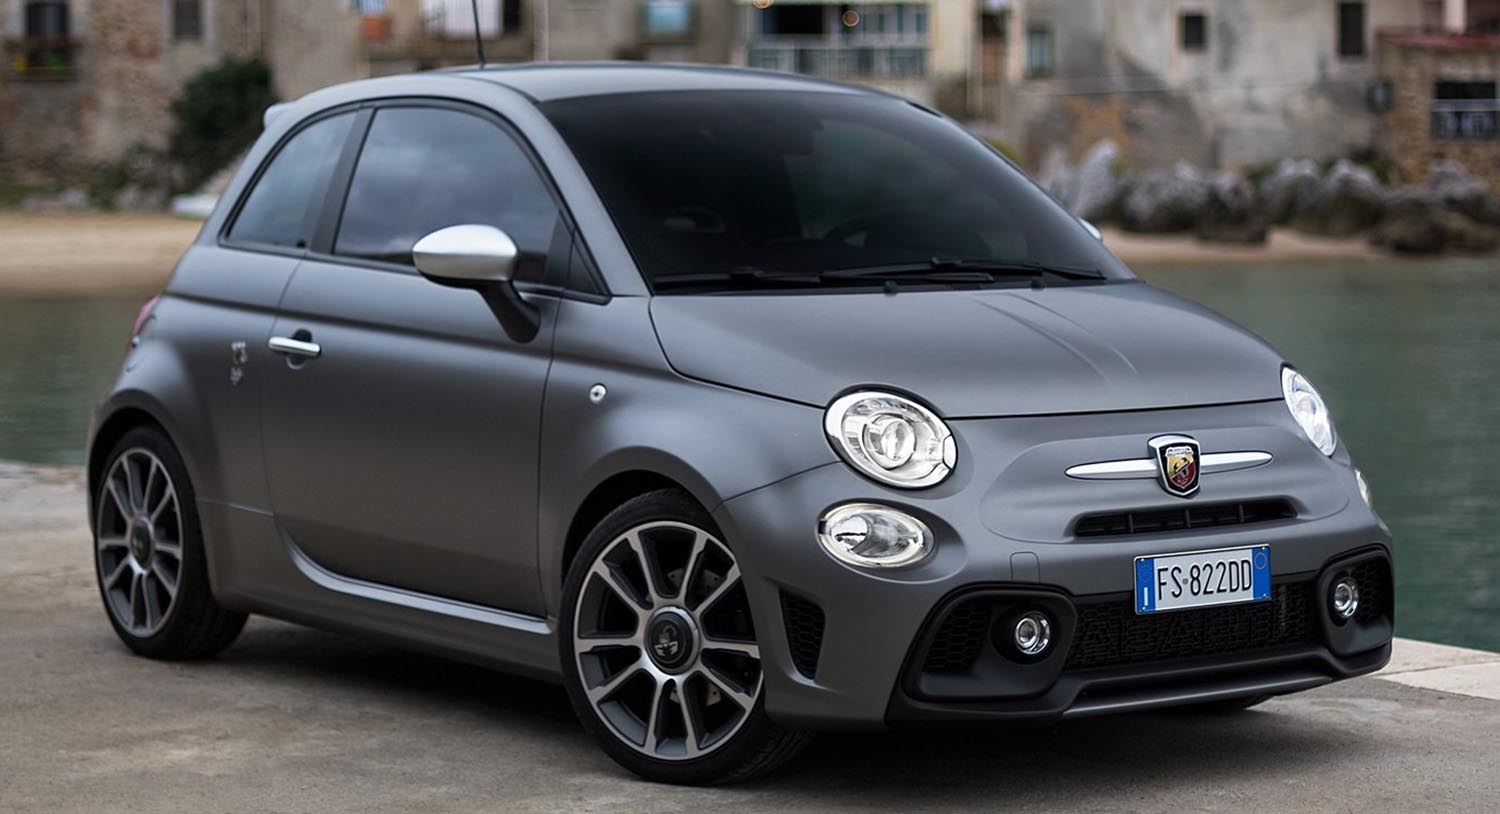 Abarth 595 – The Evolution Of The Most Iconic Model